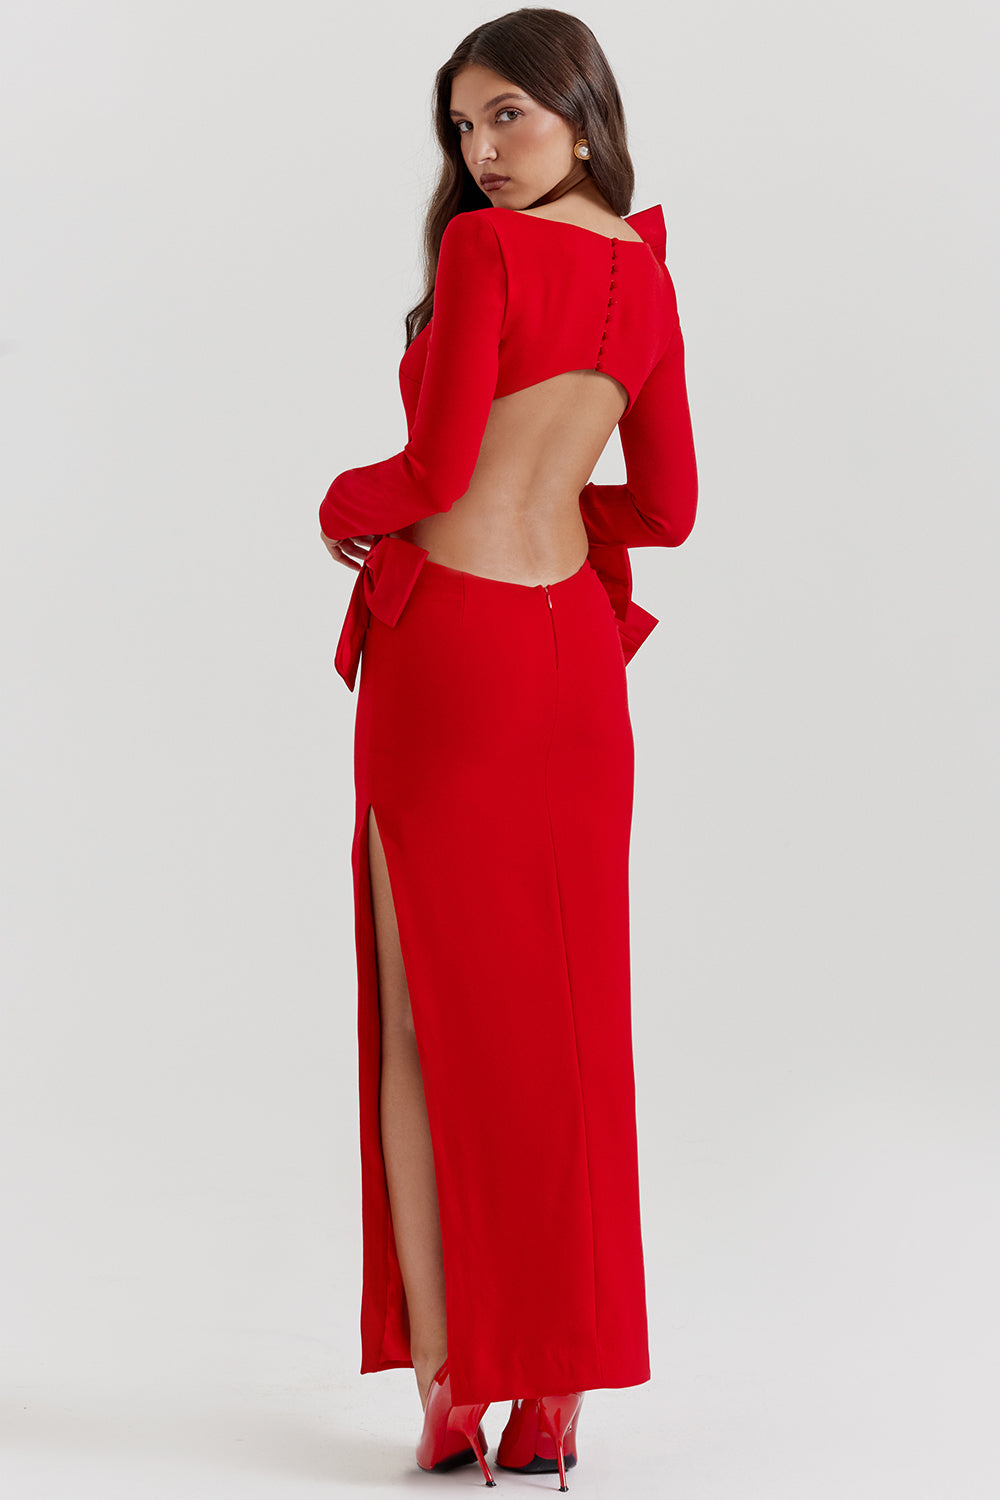  LAVELE Red Bow Maxi Dress by House of CB